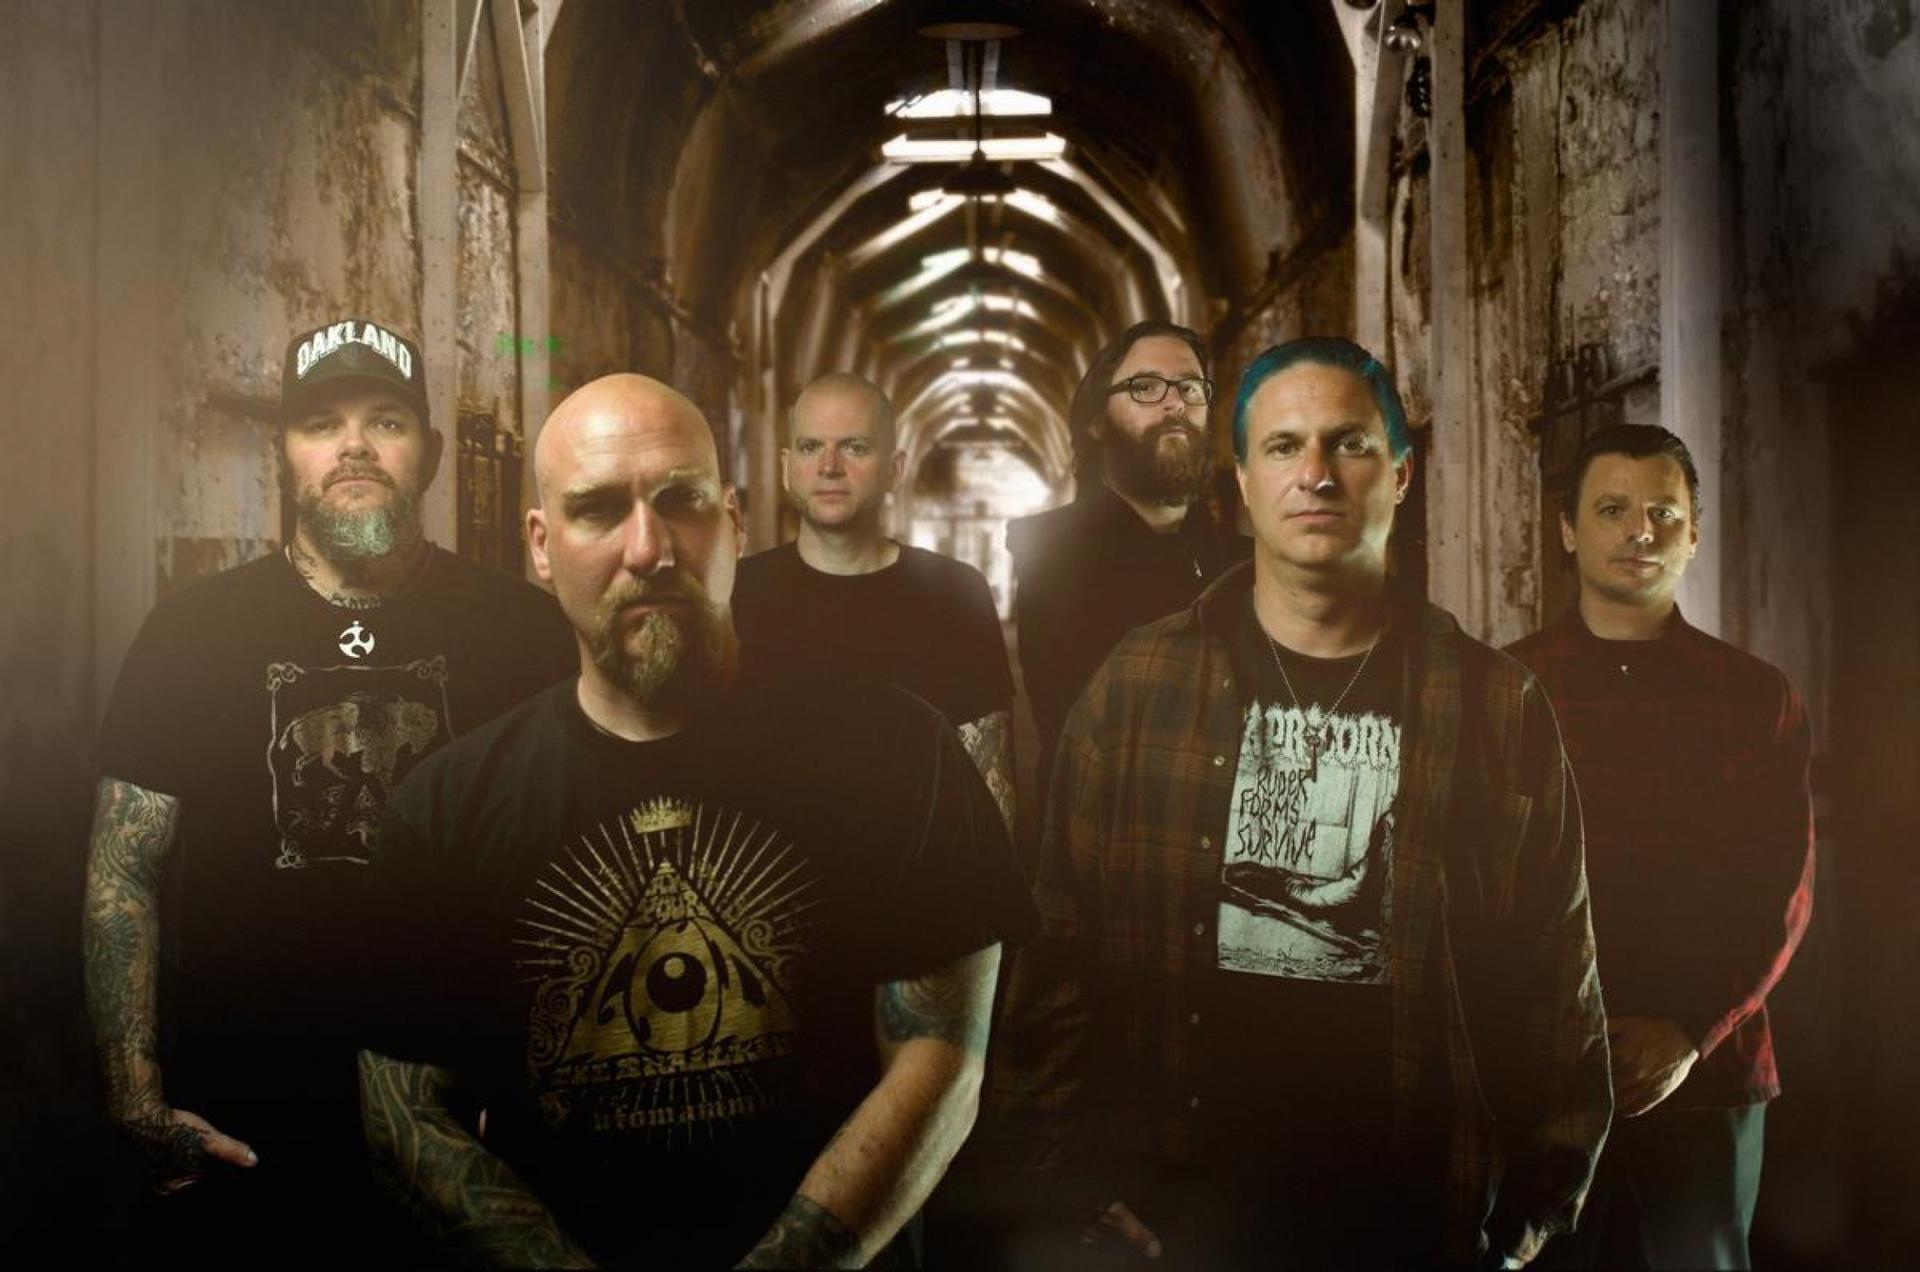 Steve Von Till (front, left) and his band Neurosis.